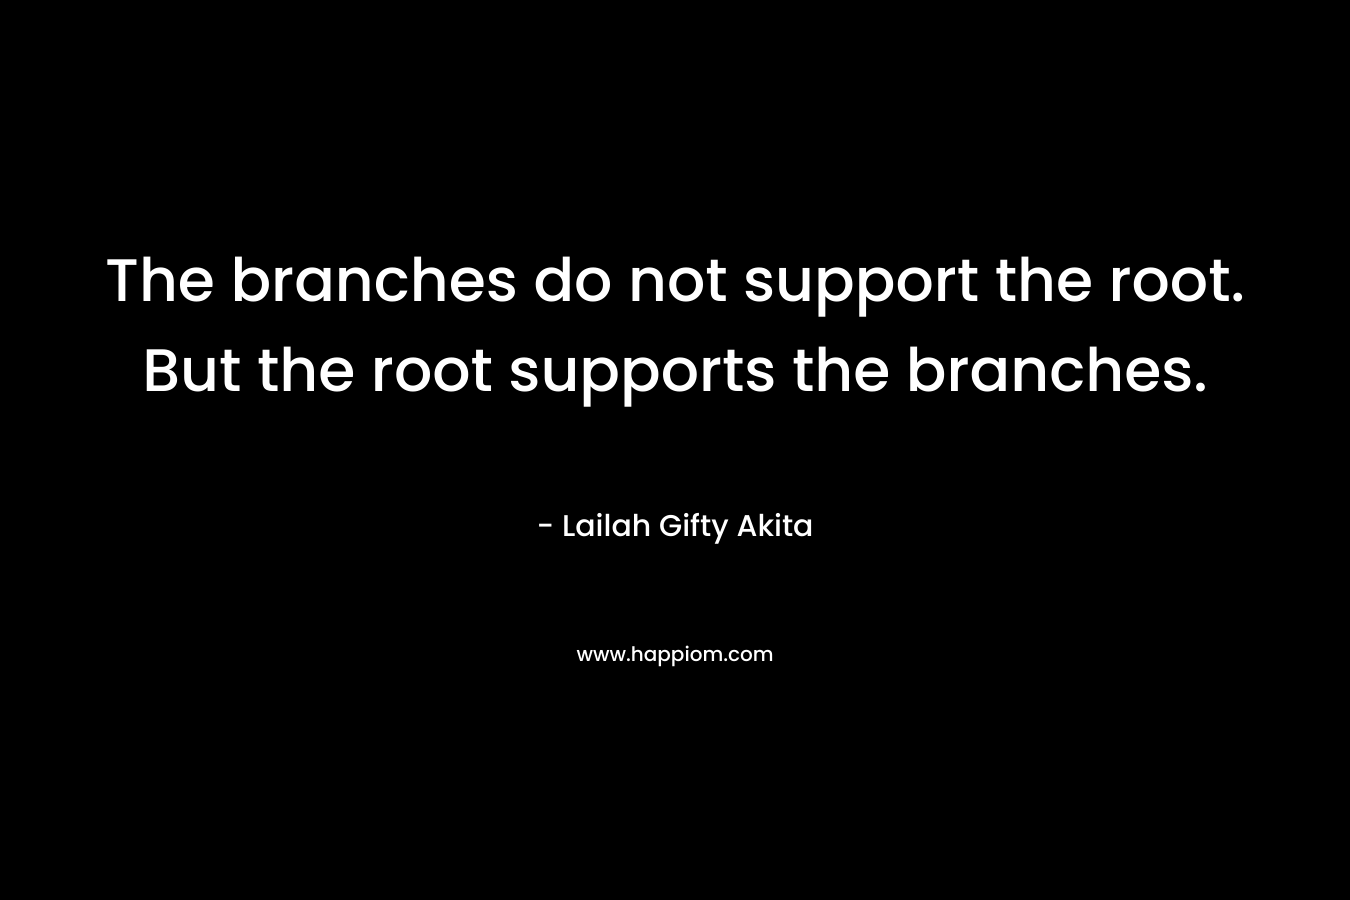 The branches do not support the root. But the root supports the branches.